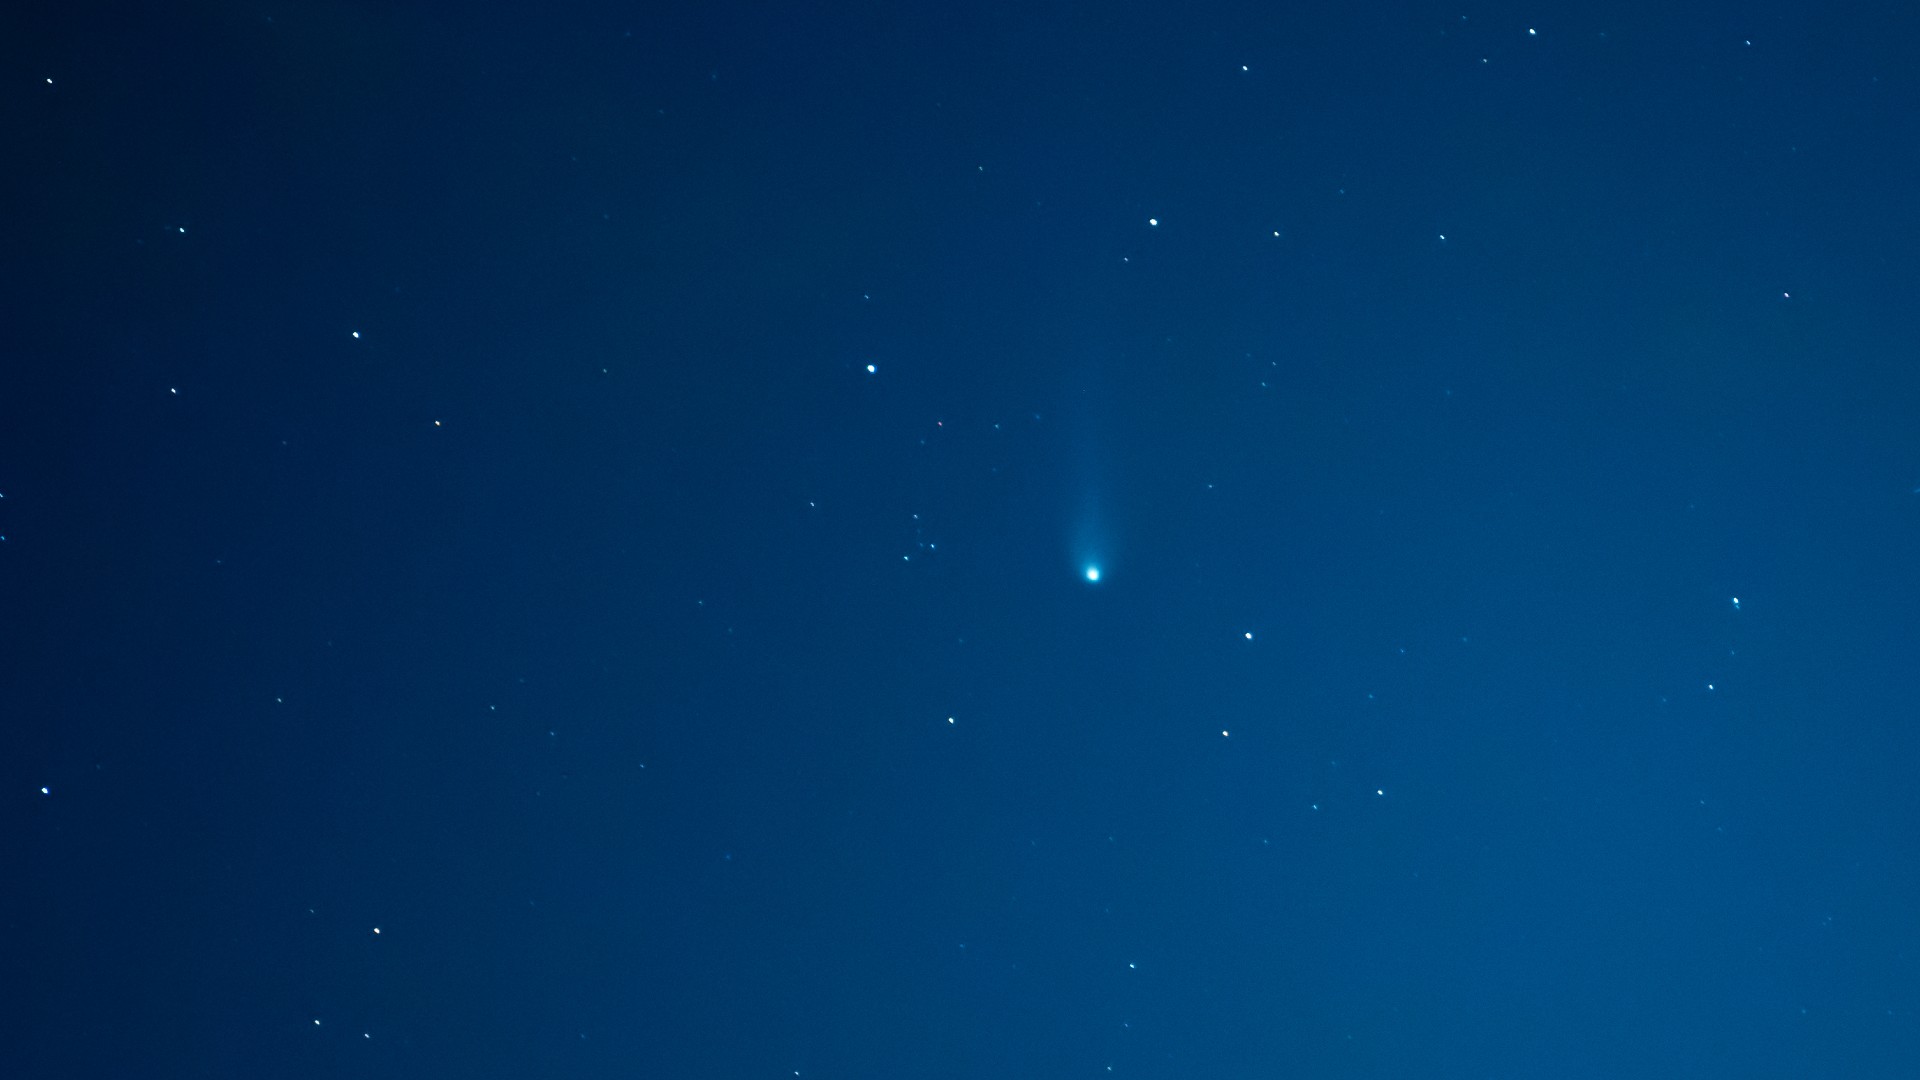 a fuzzy green comet in the night sky